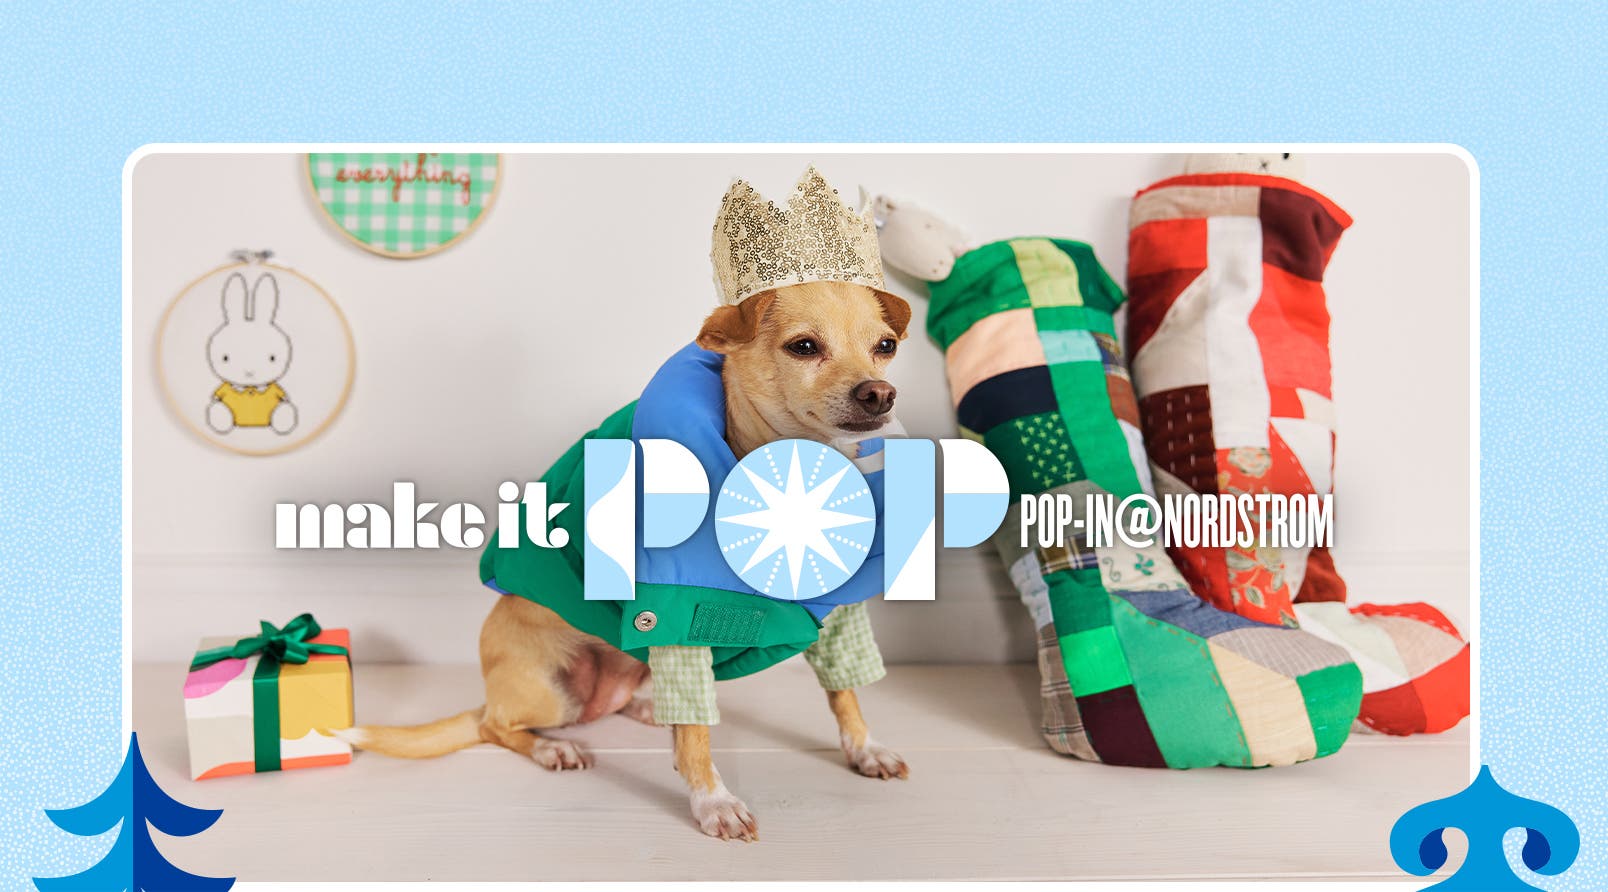 Coming October 7: Make It Pop Pop-In at Nordstrom. People celebrating the holidays.